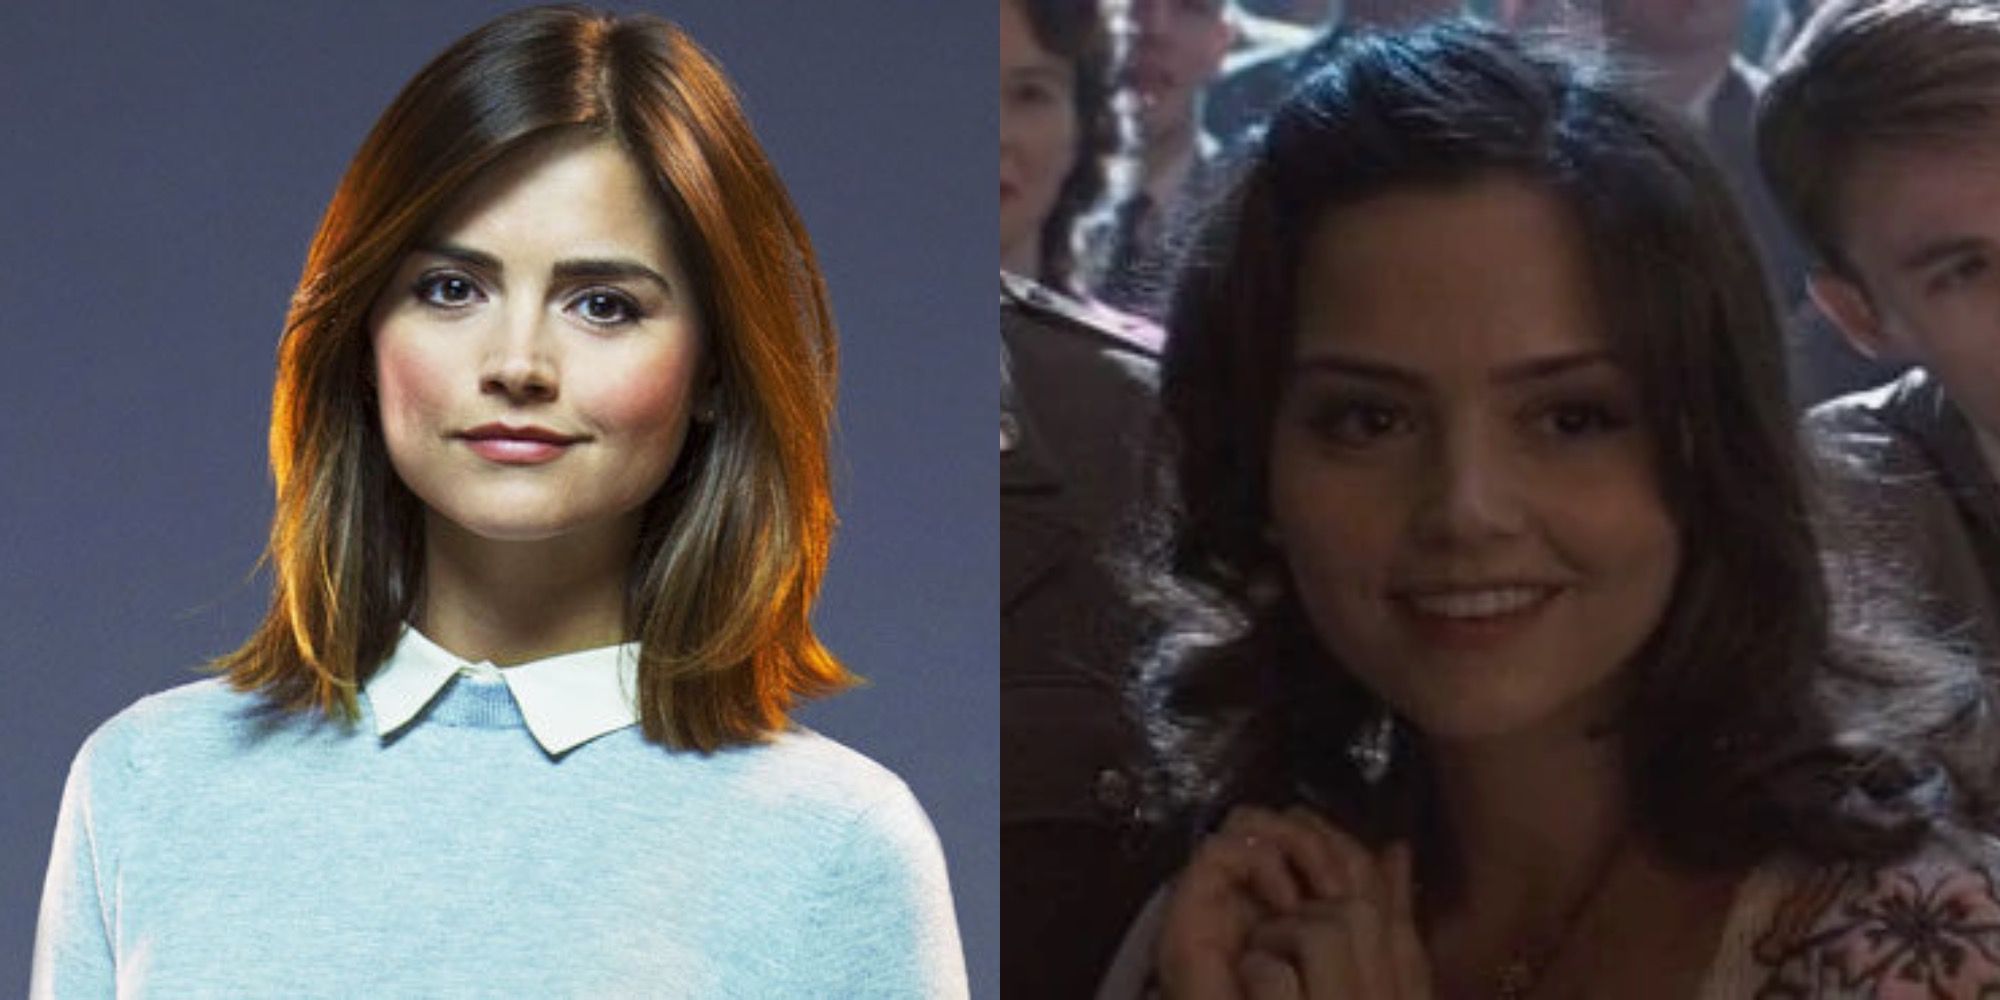 Jenna Coleman as Clara Oswald in Doctor Who and Connie in Captain America: The First Avenger